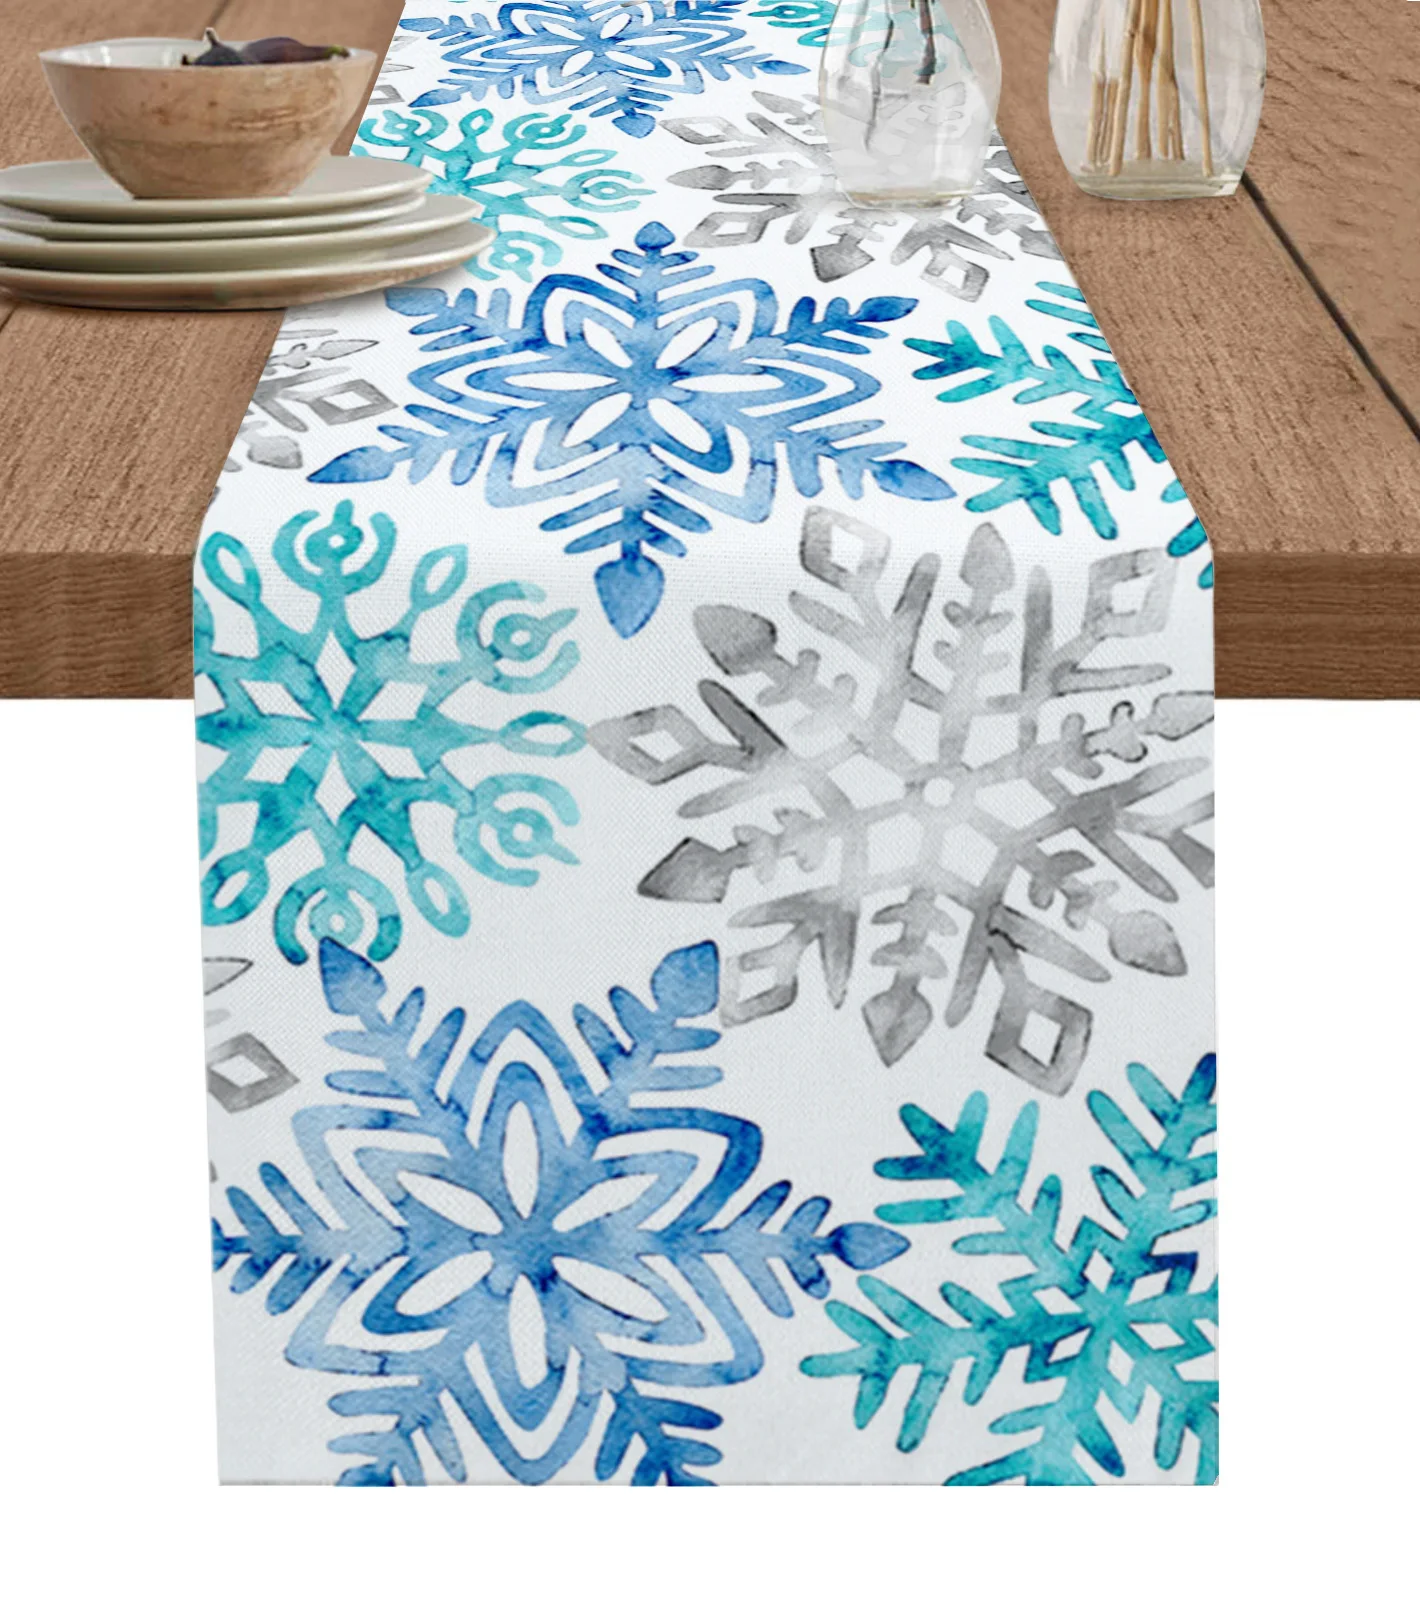 

Home Decor Table Runner Wedding Decoration Tablecloth Kitchen Table RunnersChristmas Blue Green Snowflakes